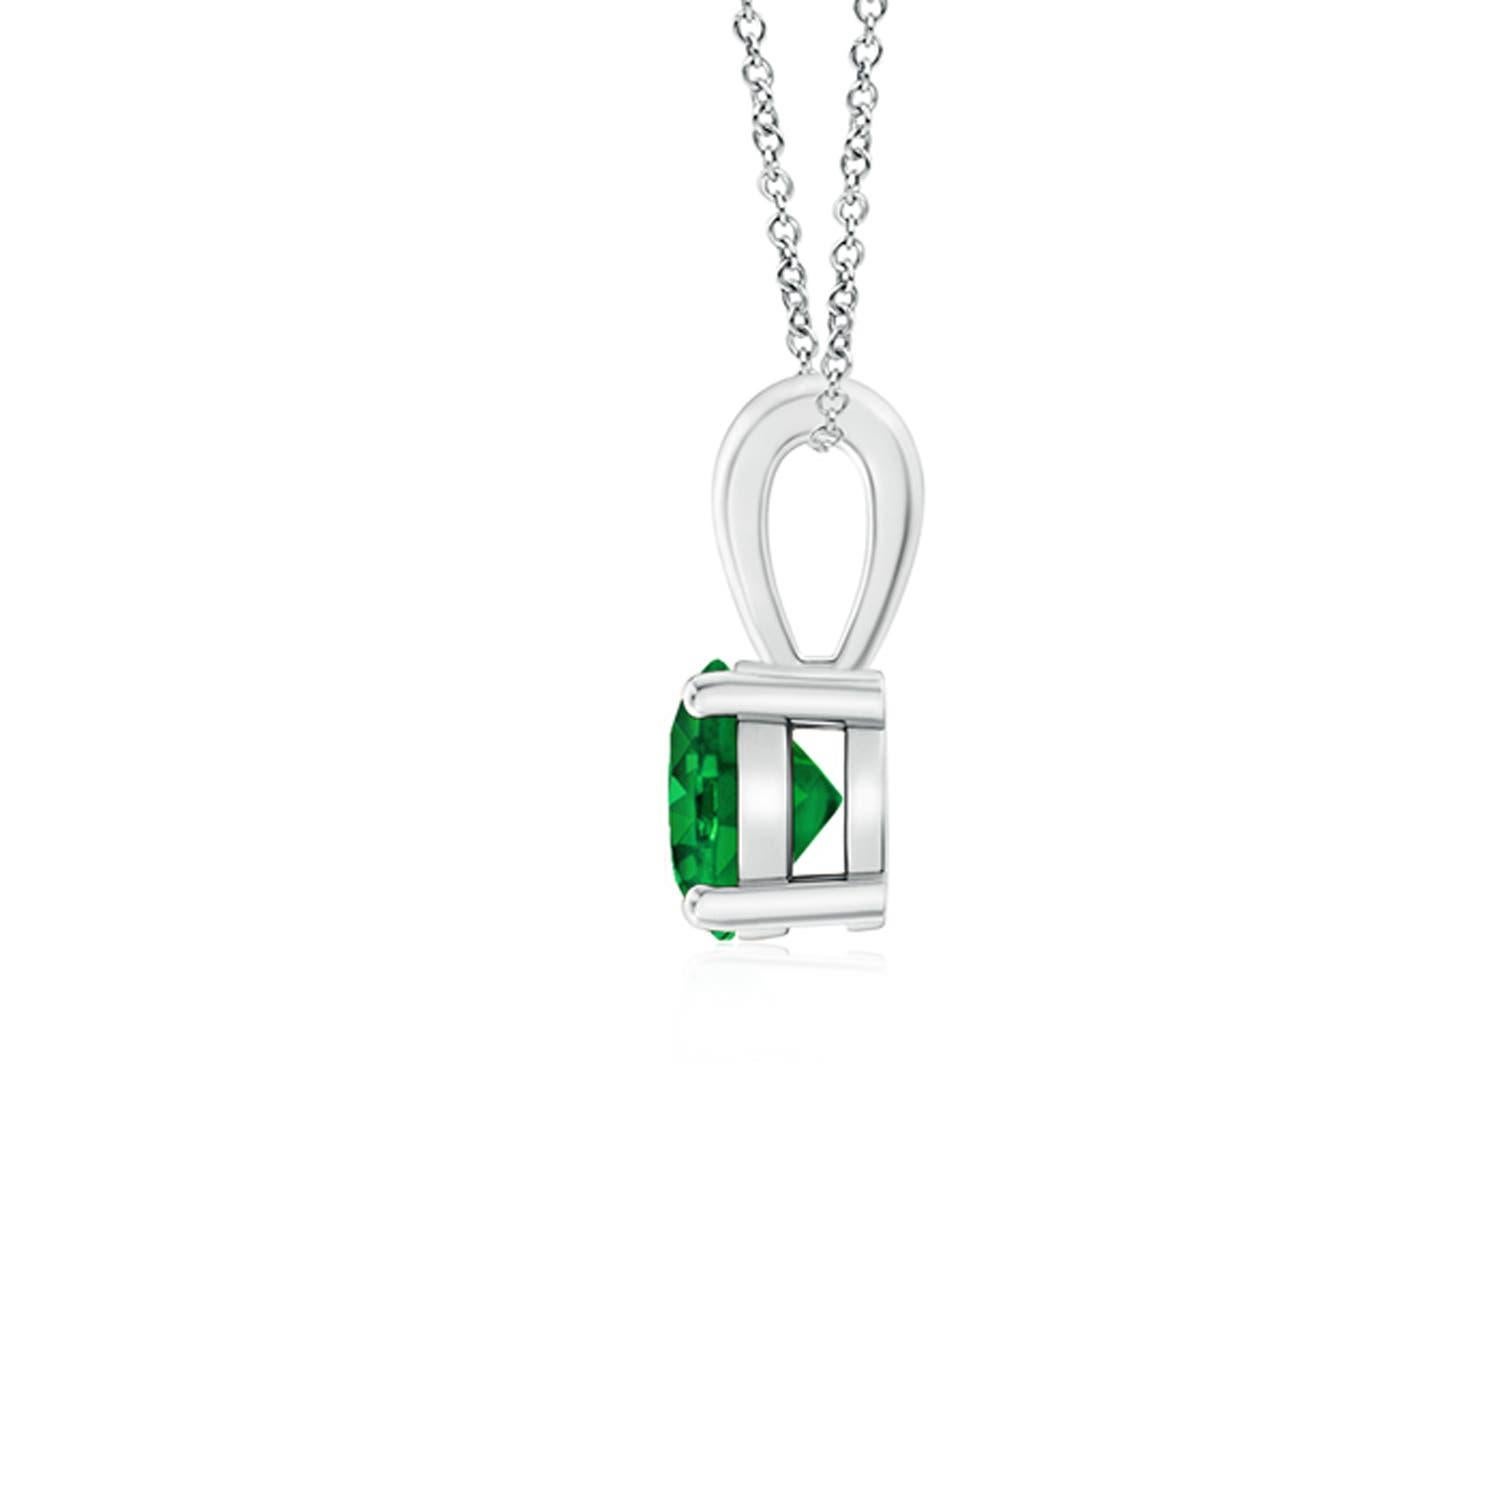 Linked to a lustrous bale is a lush green emerald solitaire secured in a four prong setting. Crafted in Platinum, the elegant design of this classic emerald pendant draws all attention towards the magnificence of the center stone.
Emerald is the